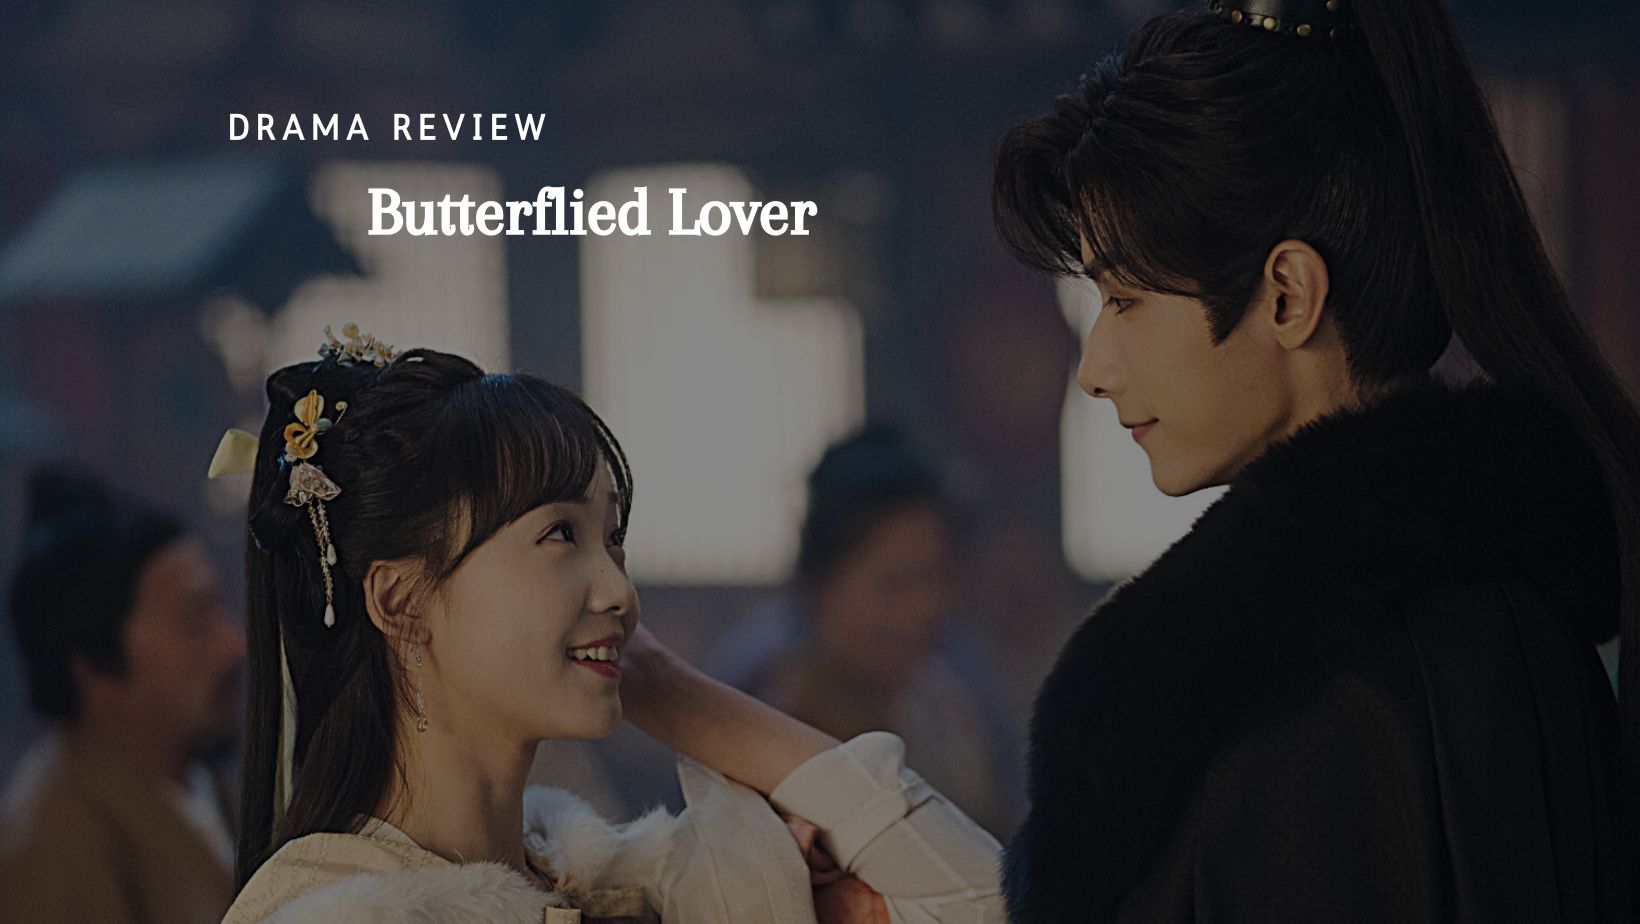 Drama Review: Butterflied Lover